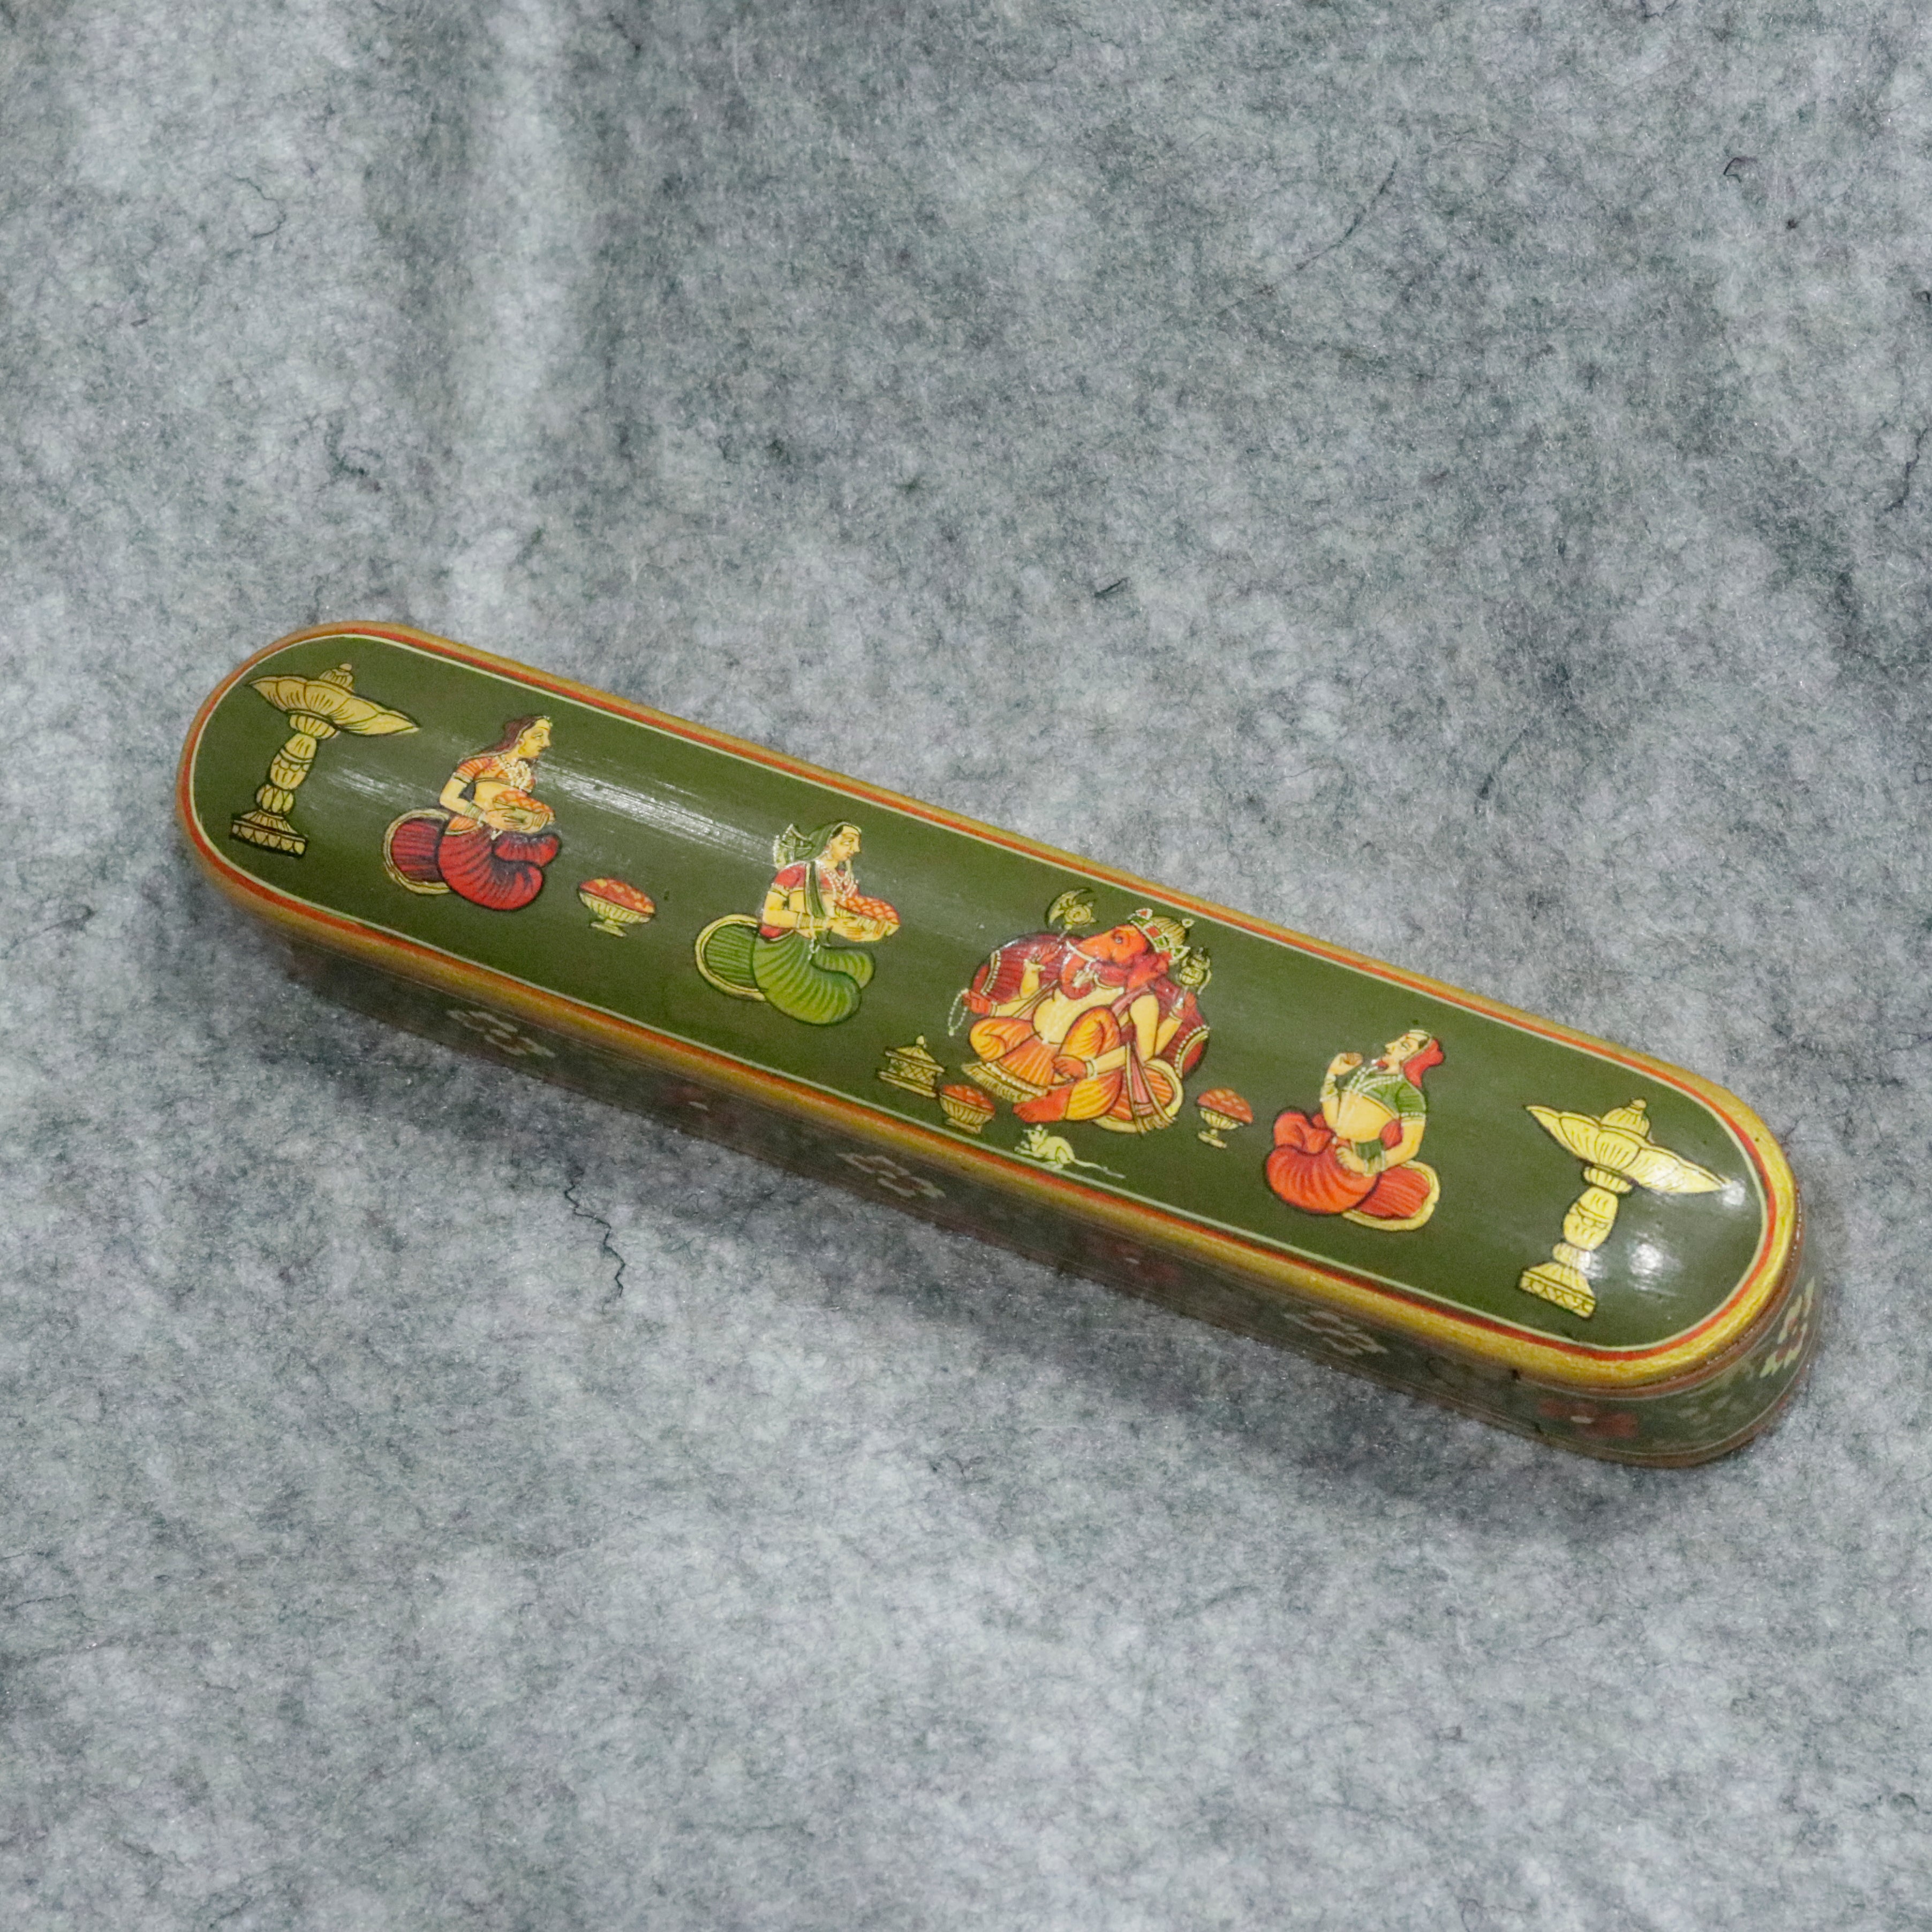 Artisan-Crafted Pen & Pencil Box: Traditional Indian Hand-Painted Elegance Wooden Box